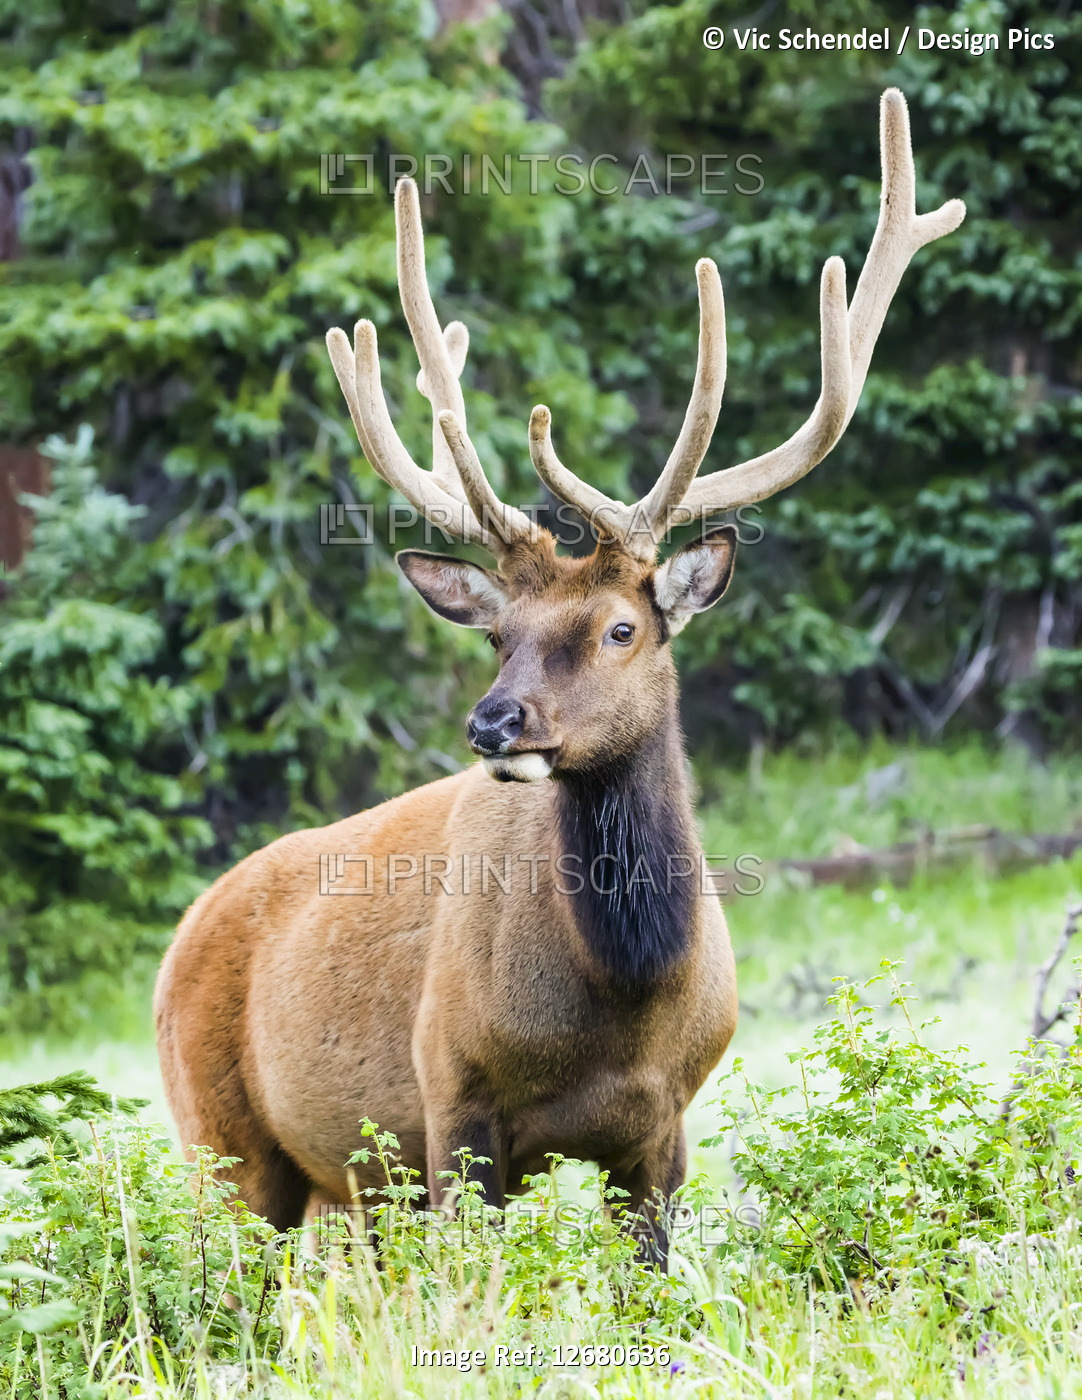 Bull Elk at the edge of a forest